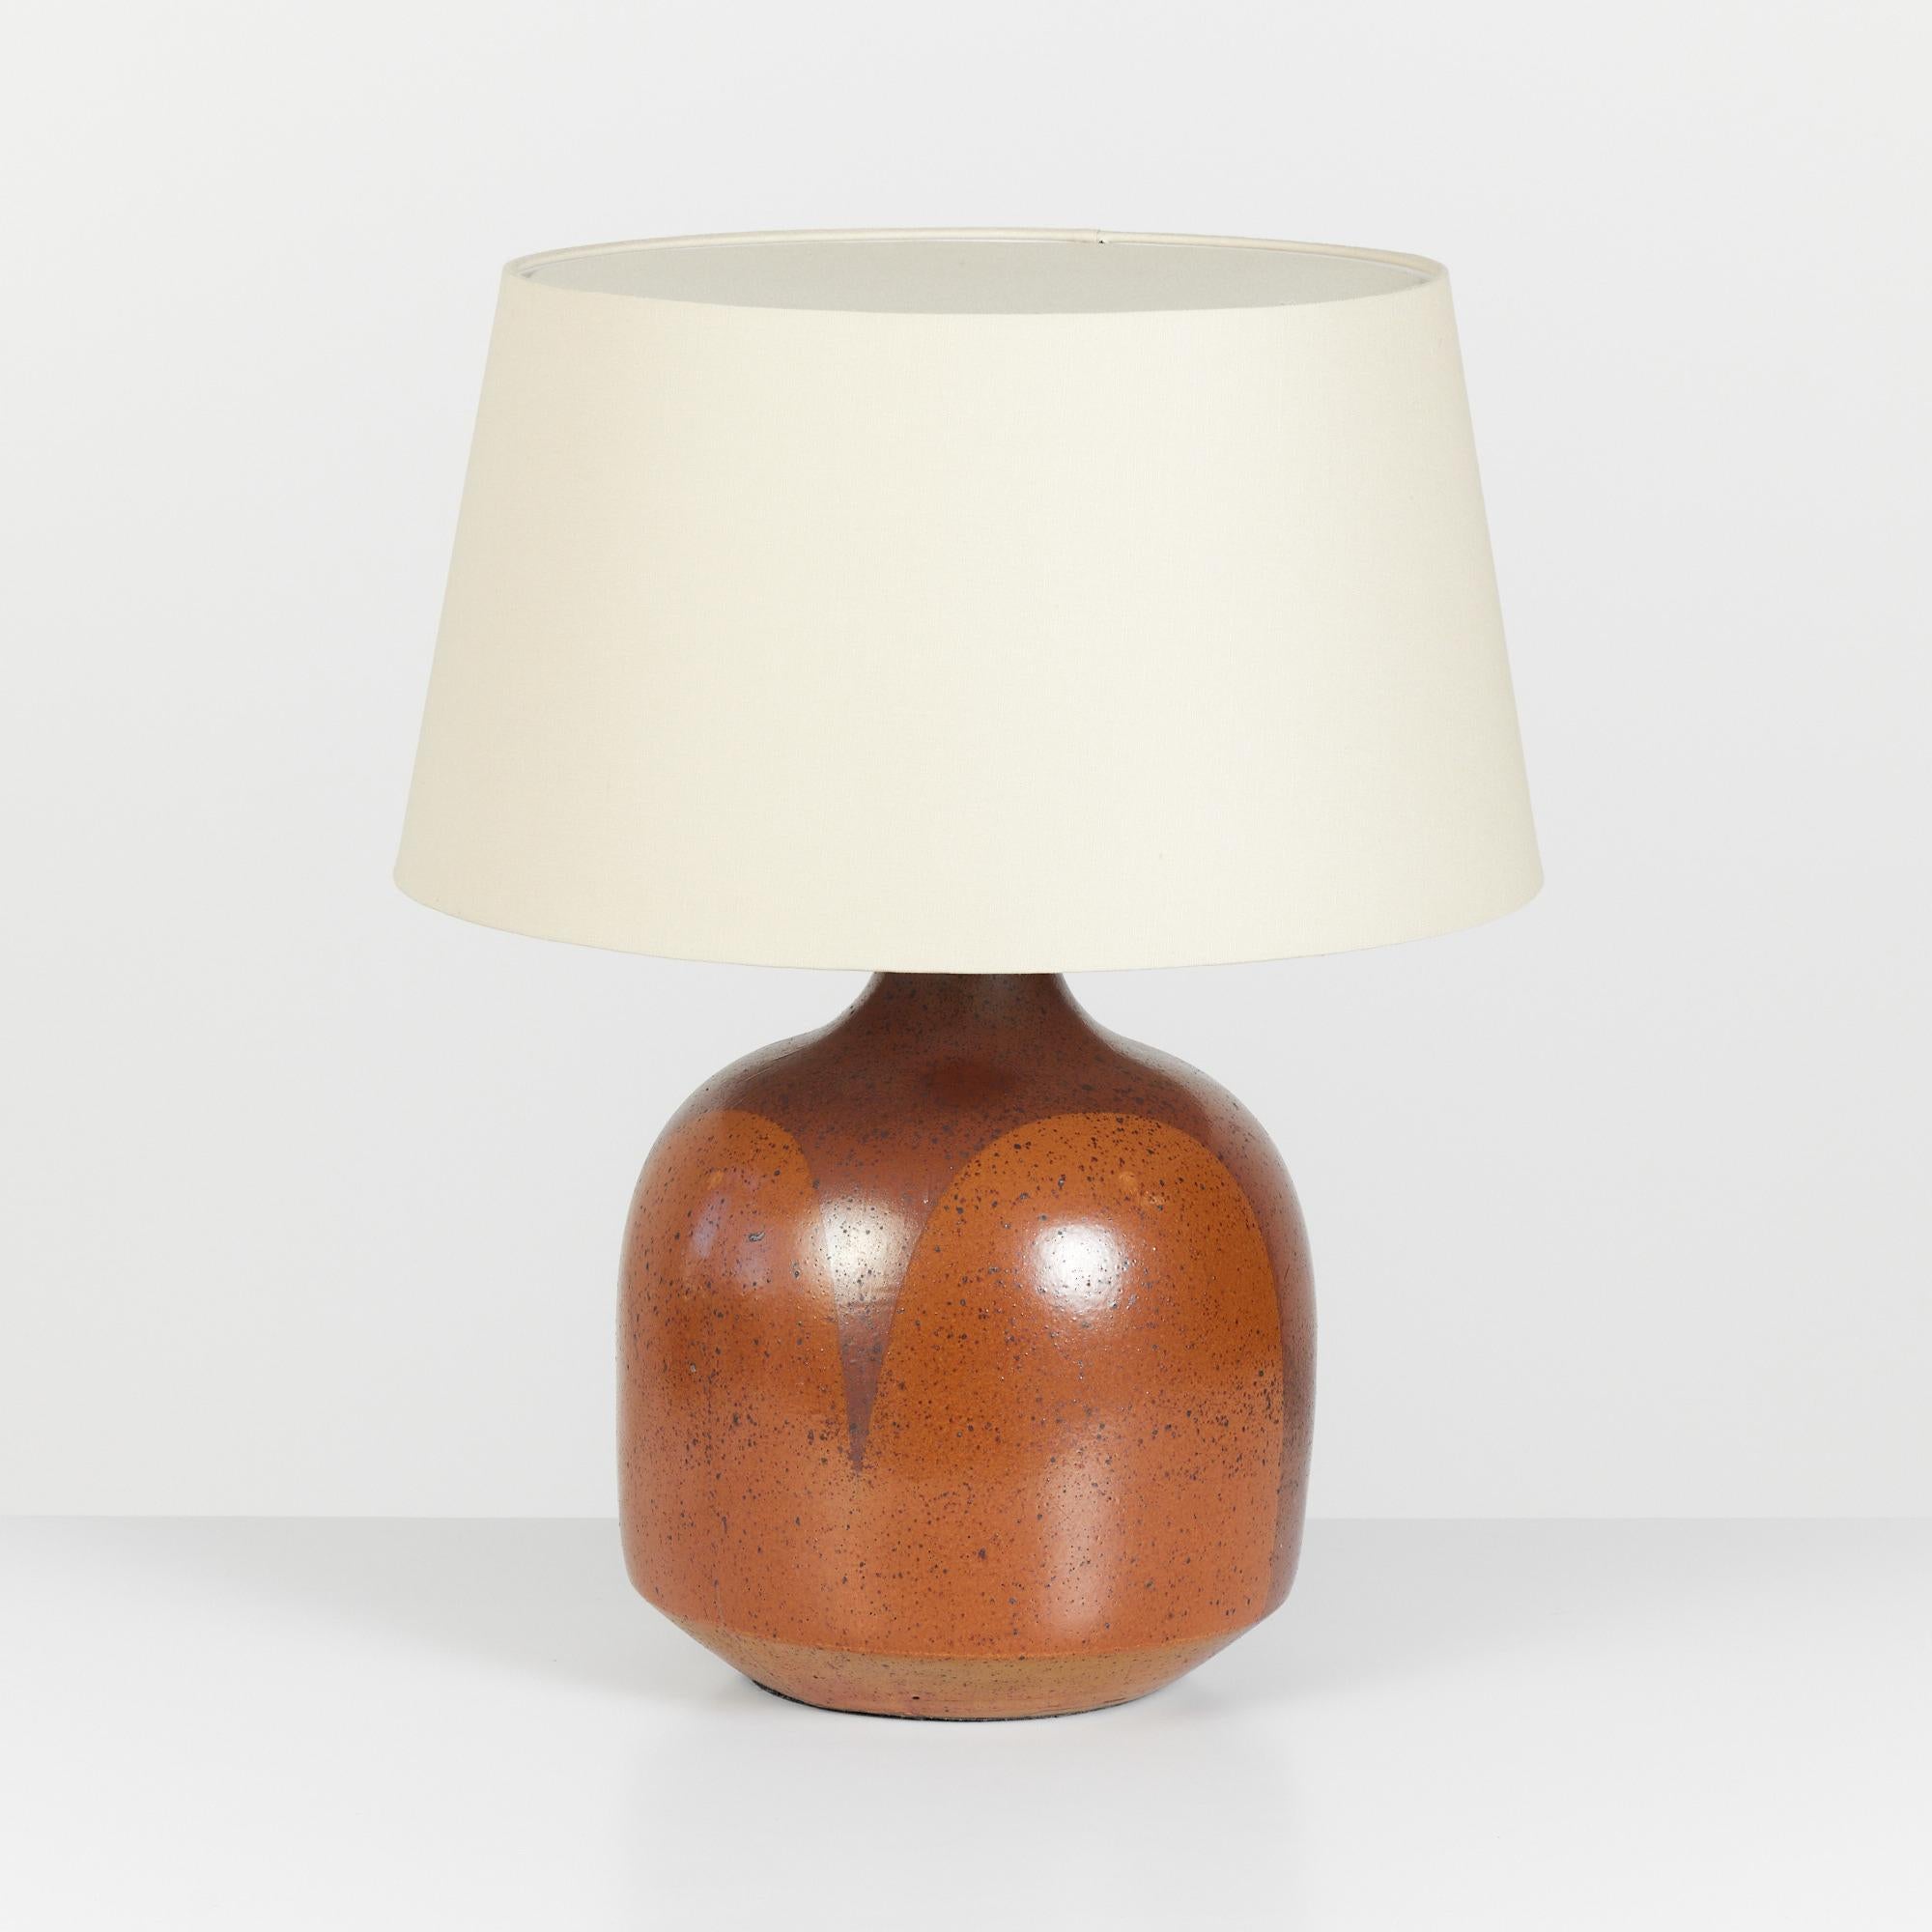 David Cressey flame glaze lamp, circa 1960s, USA. The wheel thrown stoneware lamp features a speckled flame glaze detail. The burnt orange and brown glaze pattern drip lines terminate near the base of the lamp, mimicking the pattern of flames. The